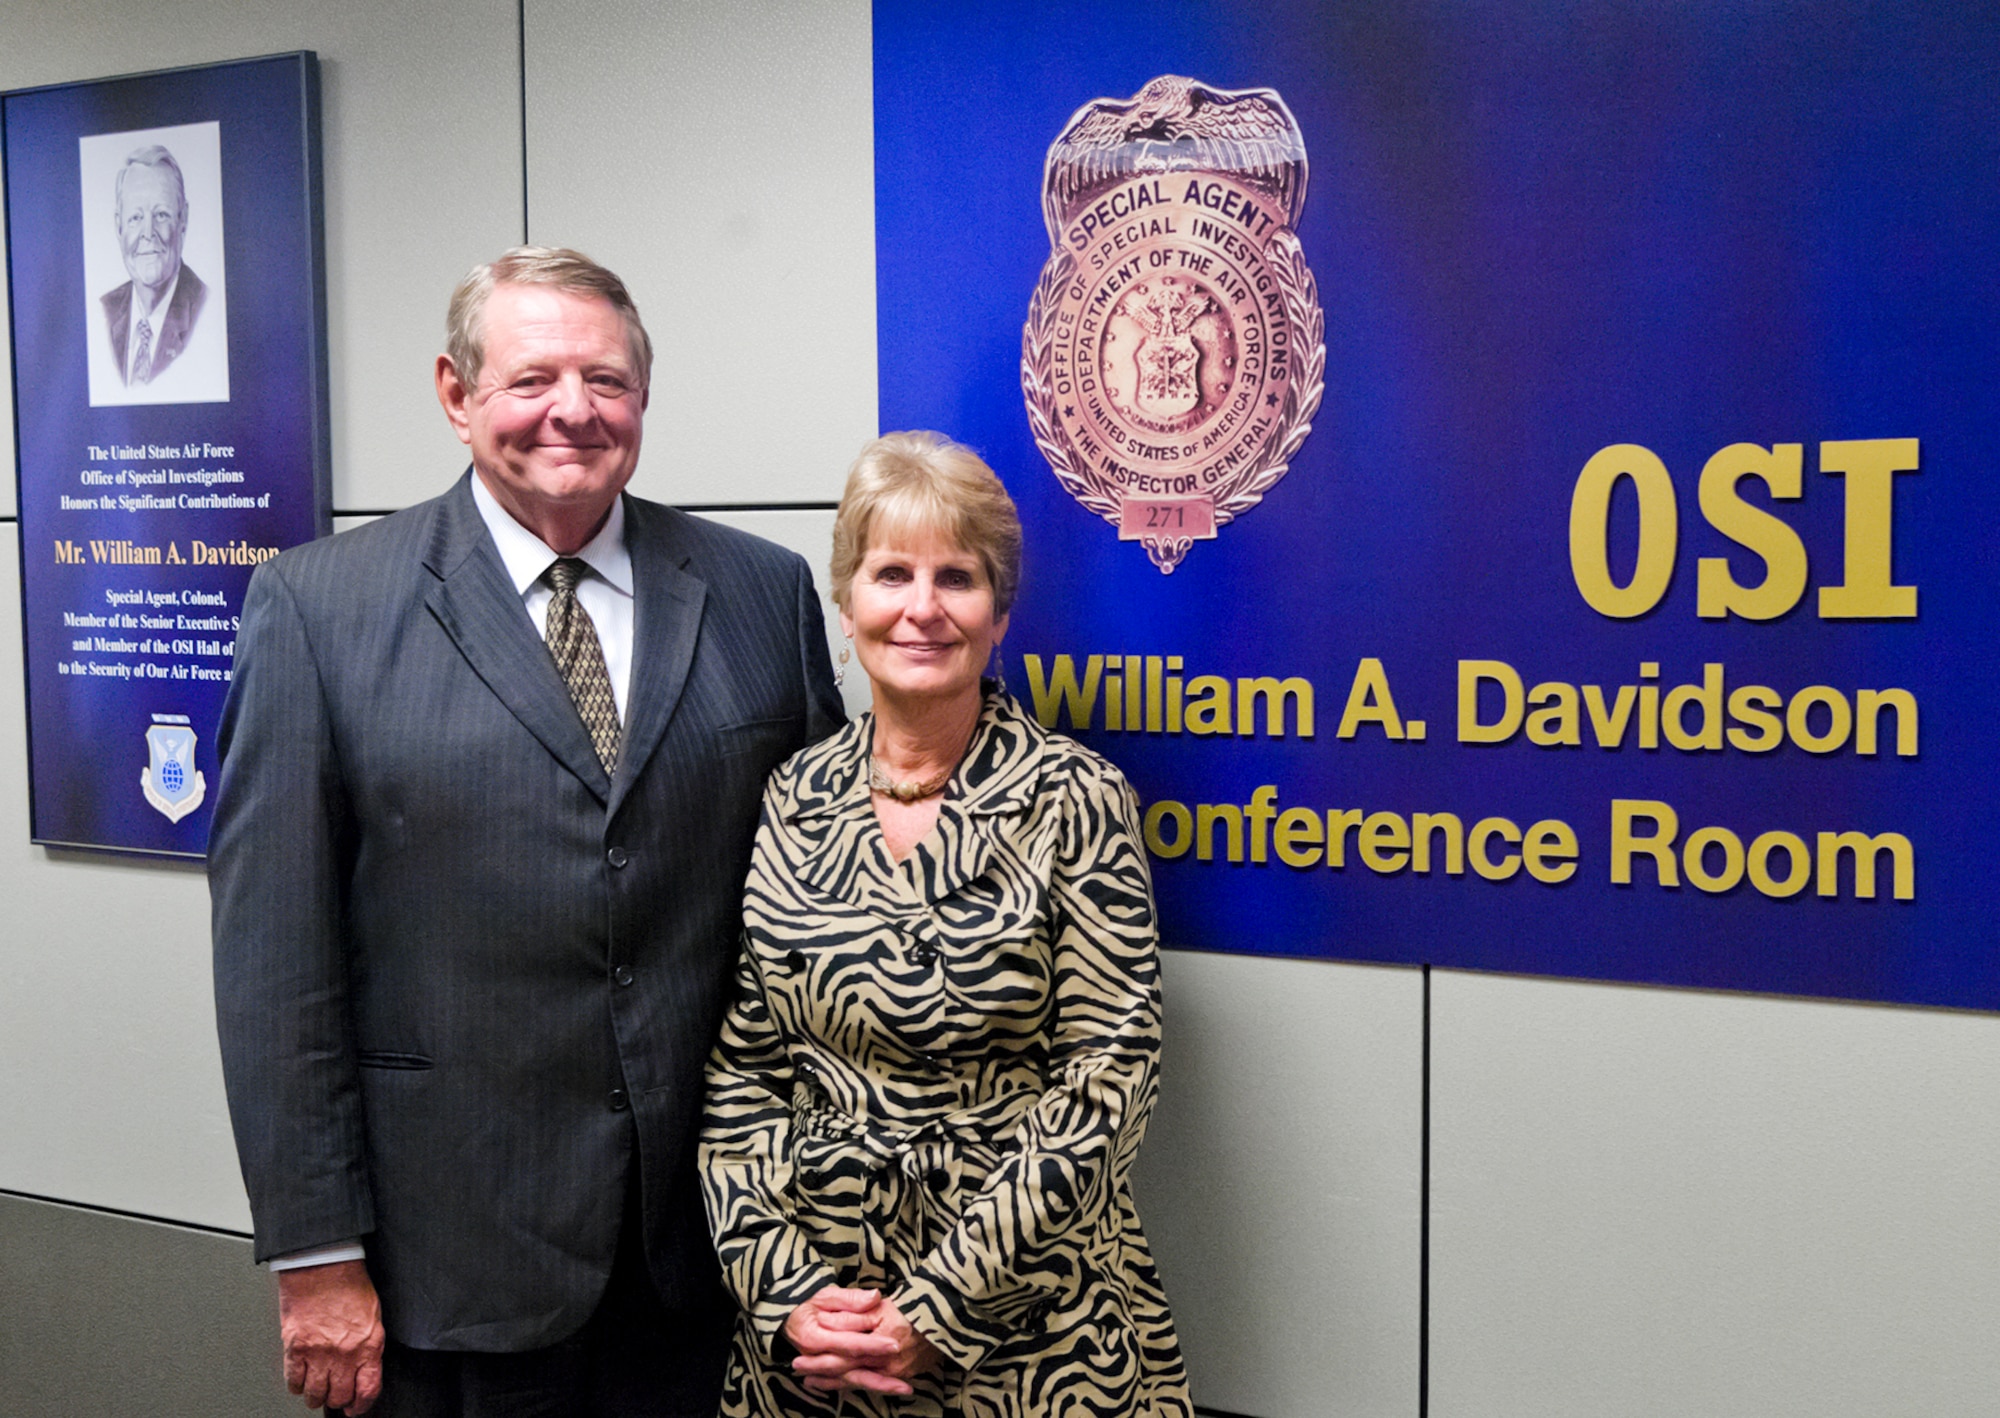 Administrative Assistant to the Secretary of the Air Force, Mr. William A. Davidson, and his wife, Peg, stand together in the newly-named William A. Davidson Conference Room. A display featuring Mr. Davidson's Air Force career can be seen on the wall behind them. Mr. Davidson and his wife were invited to the Air Force Office of Special Investigations Headquarters at Marine Corps Base Quantico, Va., Sept. 23 for a special tour of the facility. (U.S. Air Force Photo by Mr. Mike Hastings.)